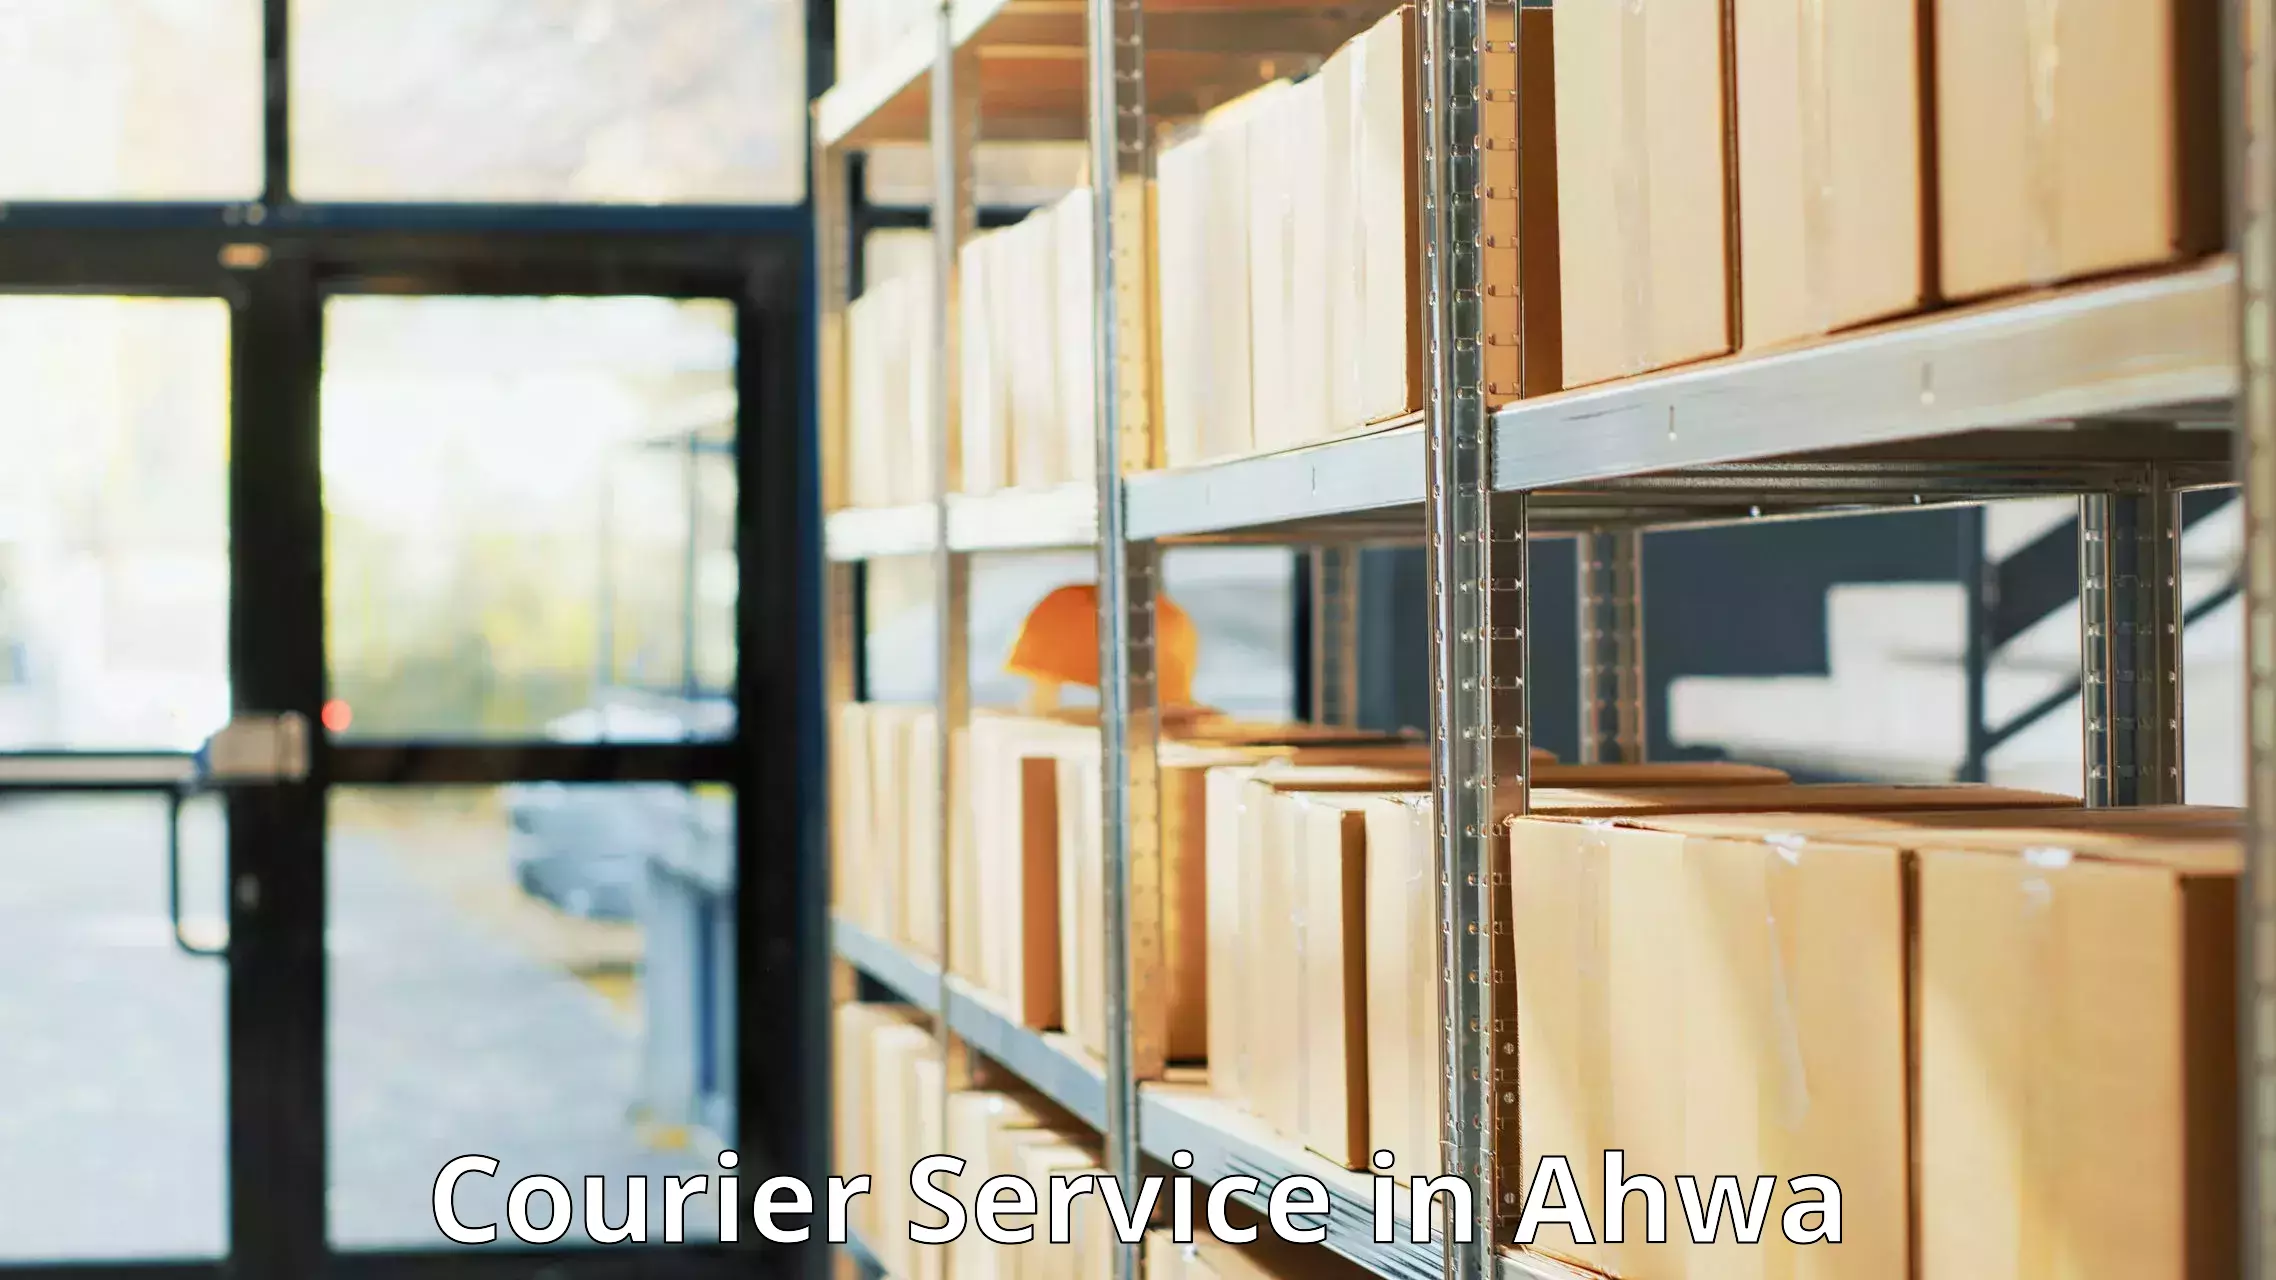 Seamless shipping experience in Ahwa